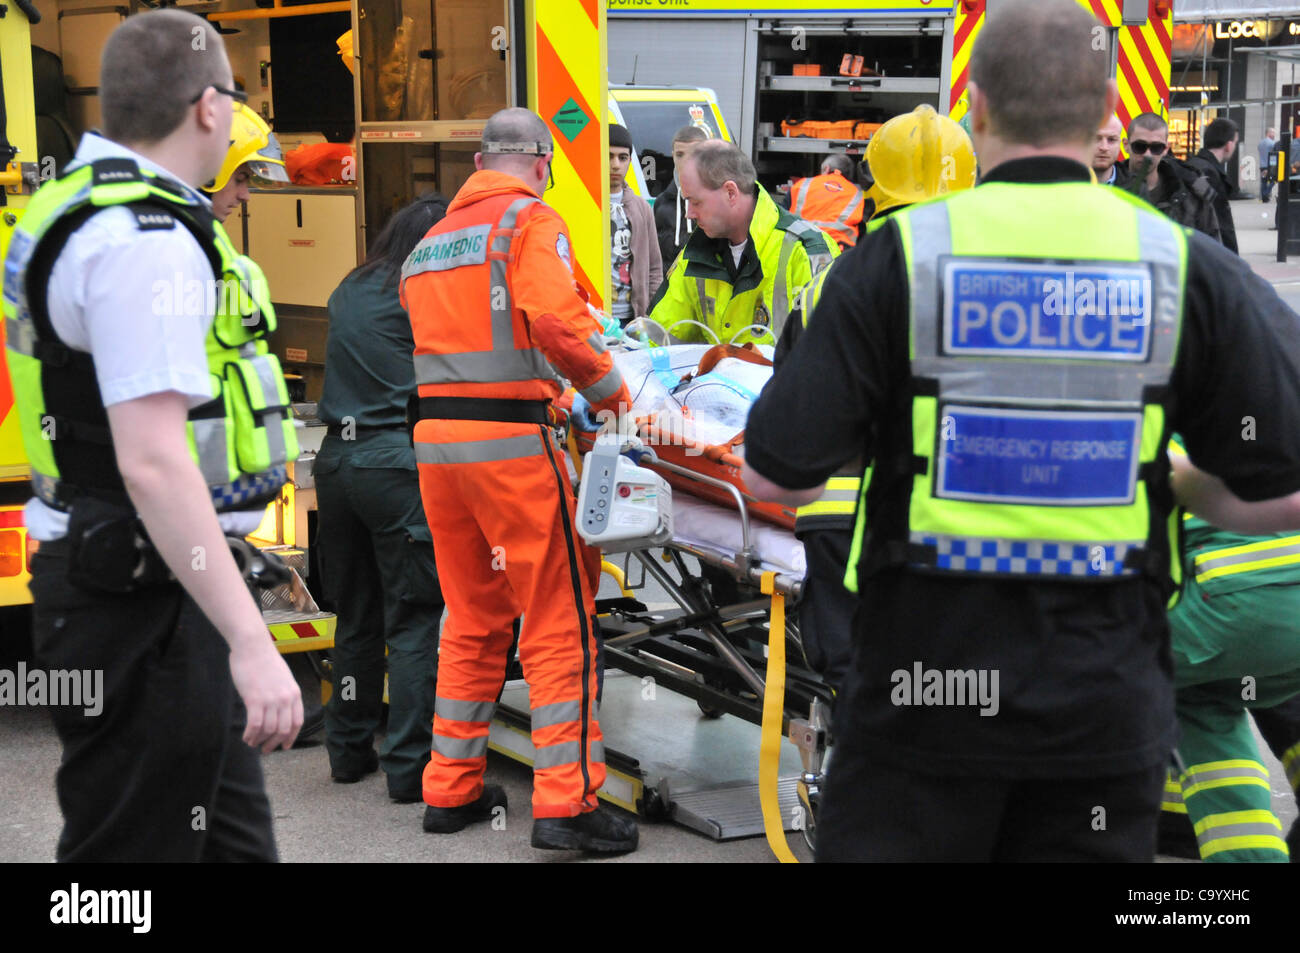 Wood Green London 10/3/12 Person under a train at Wood Green Underground station, paramedics, ambulance staff and police attend the scene as the station is closed to recover the person alive. The injured person is put into the ambulance just after leaving the station. Stock Photo